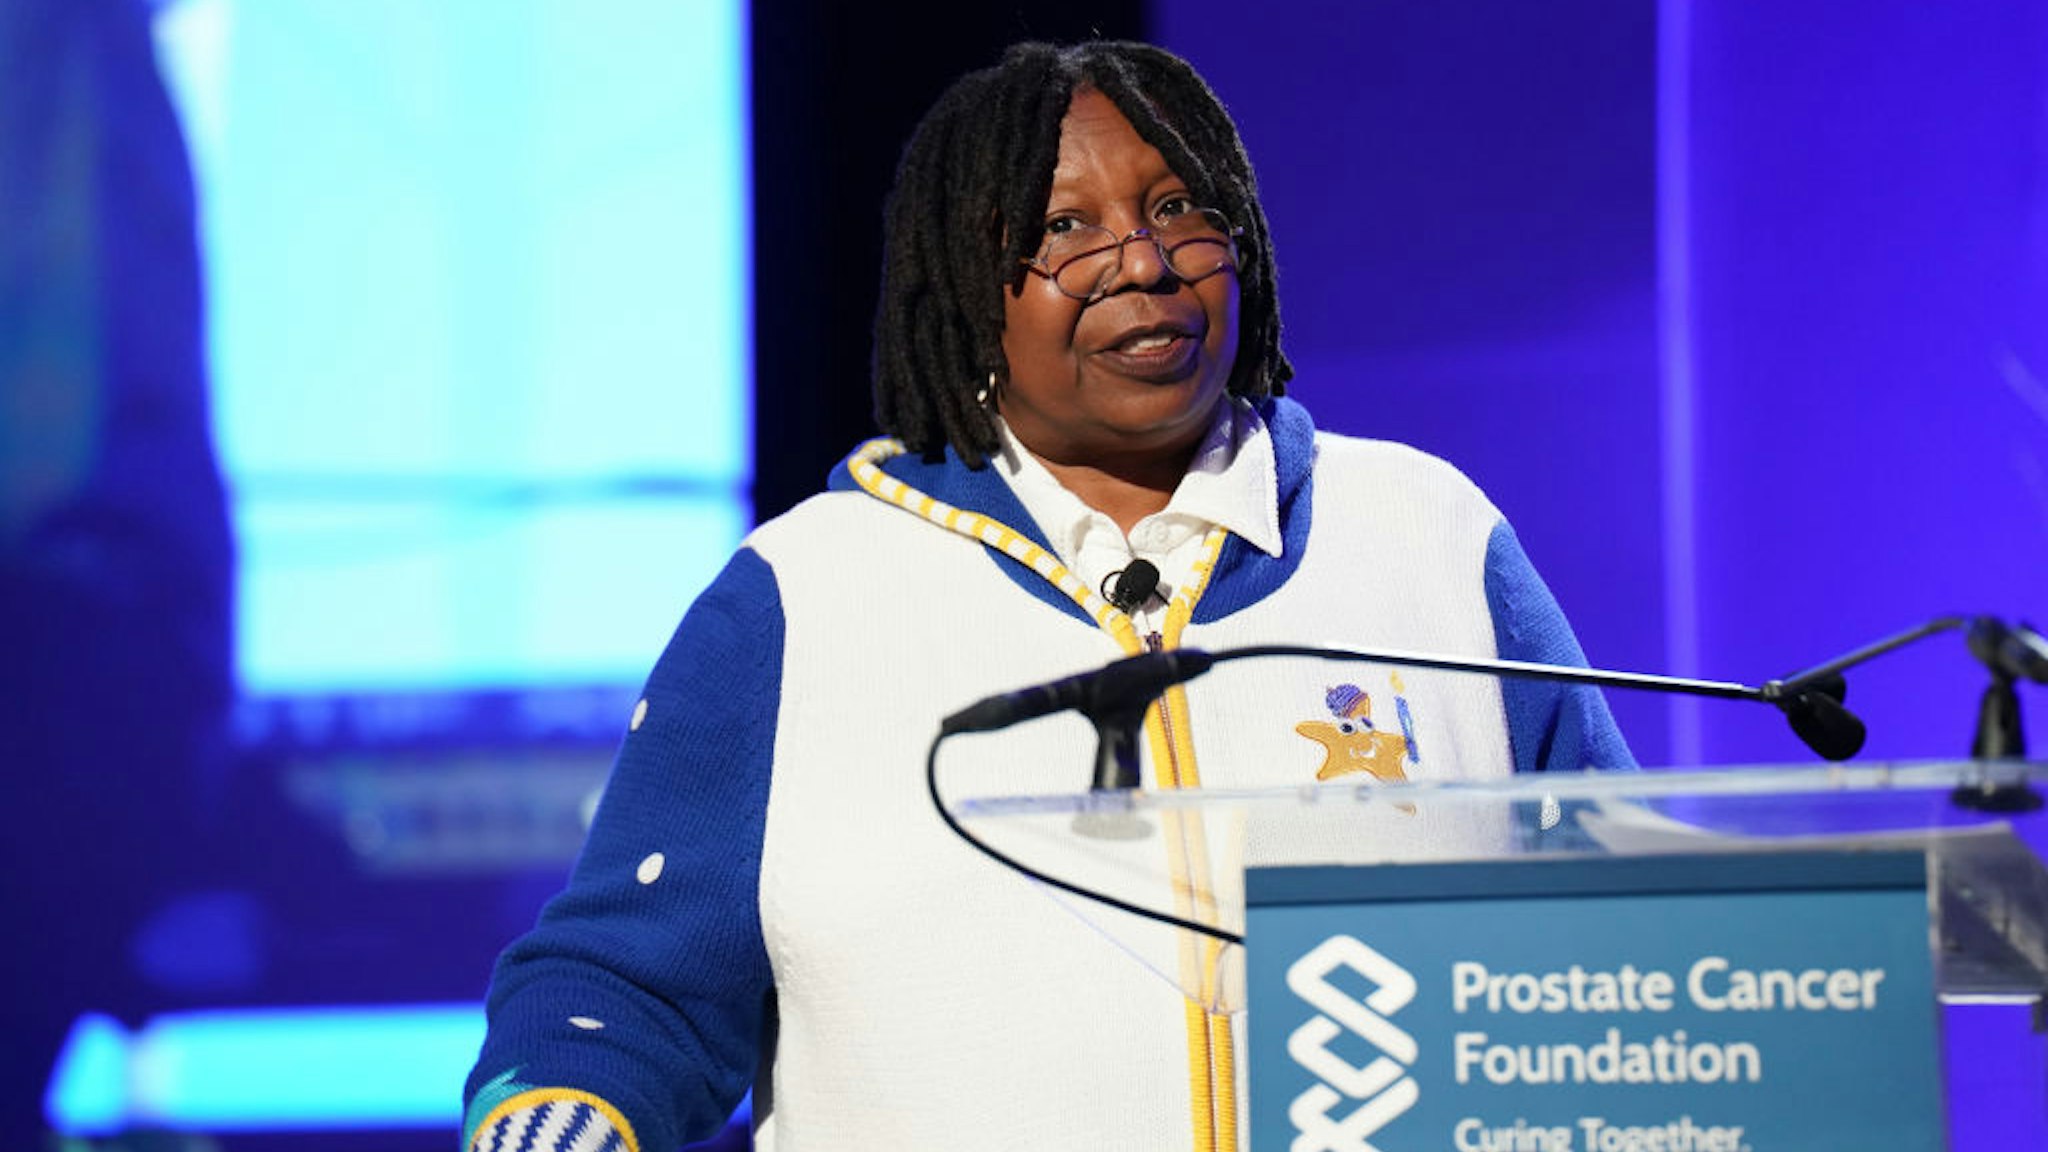 NEW YORK, NEW YORK - NOVEMBER 29: Actress Whoopi Goldberg attends Prostate Cancer Research Foundation's 25th New York Dinner at The Plaza on November 29, 2021 in New York City. (Photo by Jared Siskin/Patrick McMullan via Getty Images)